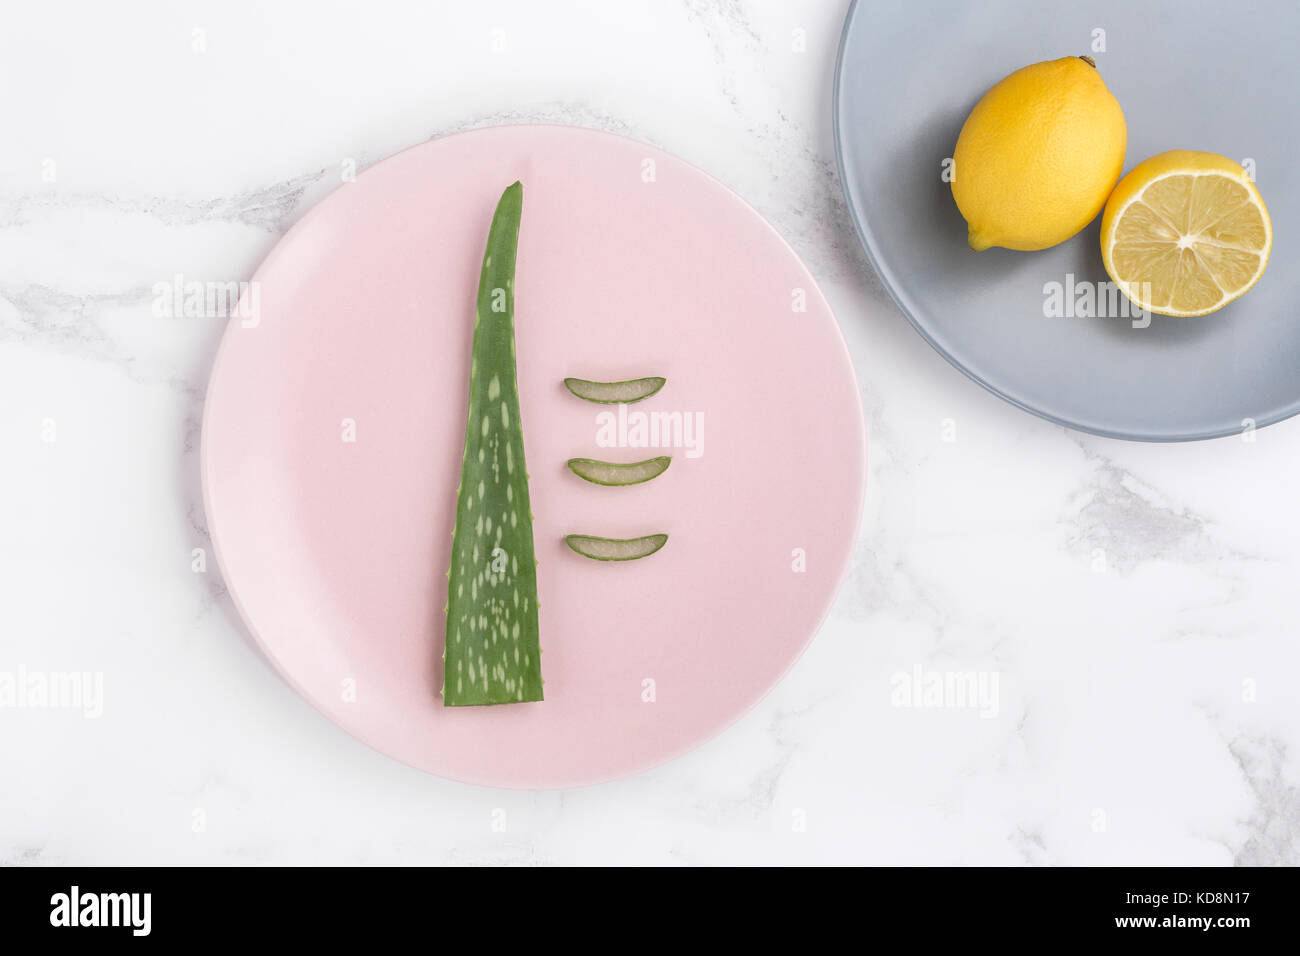 Styled lifestyle minimalist stock photo of an aloe vera plant leaf and cut open lemons on pink and blue plates on a marble background. Stock Photo